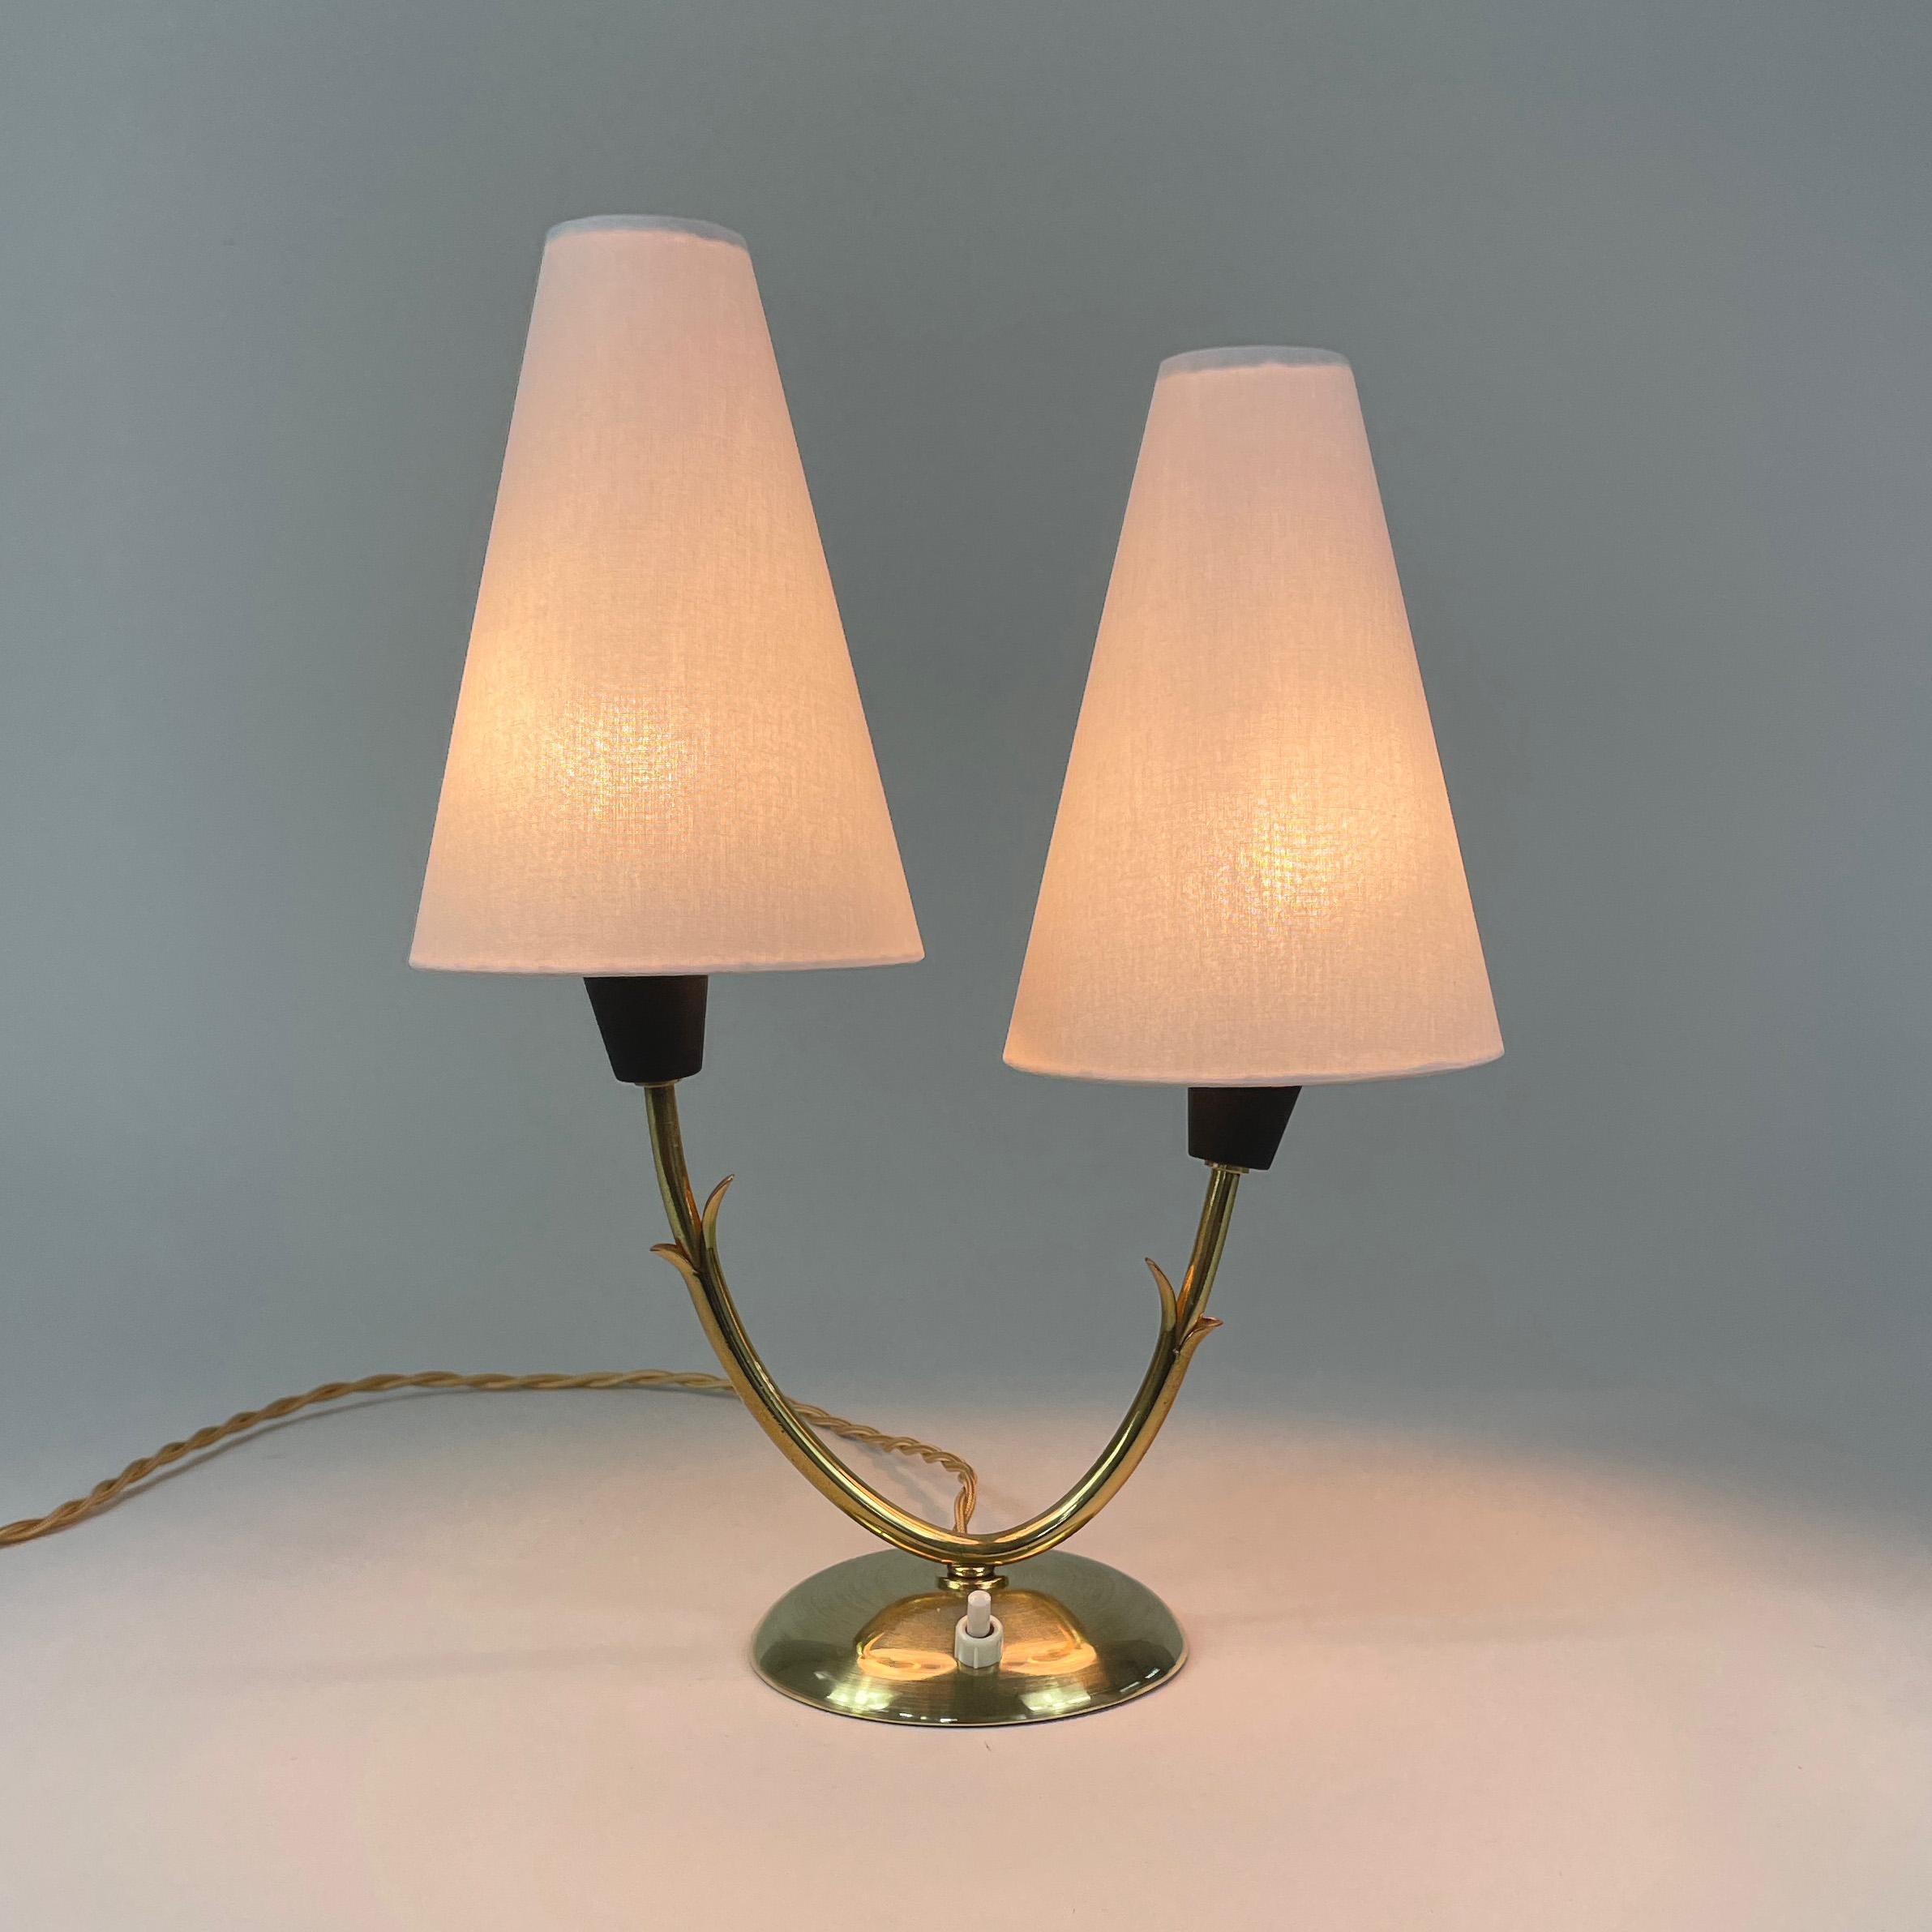 Double Arm Brass Table Lamp, Sweden 1950s For Sale 8